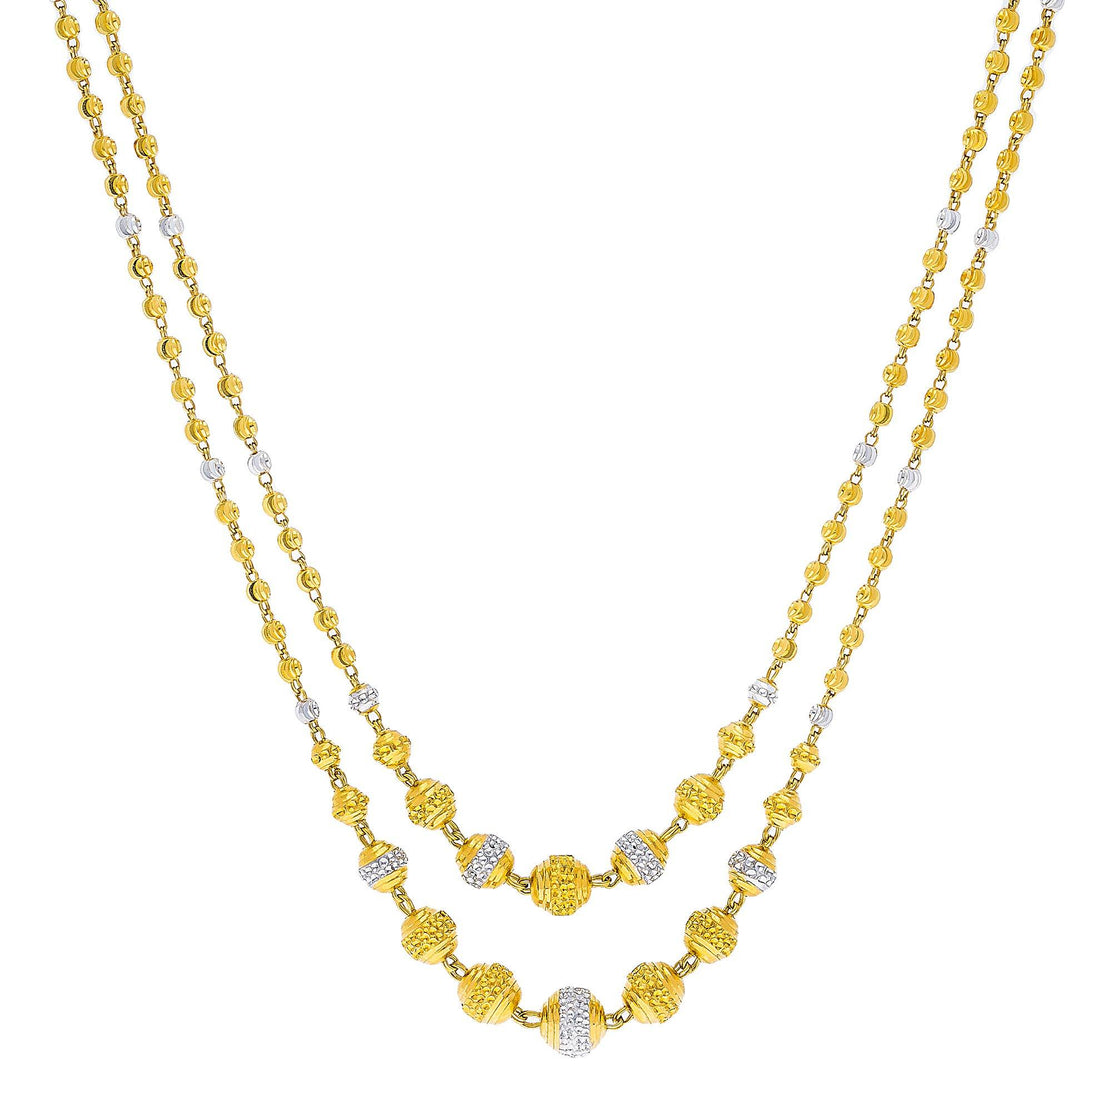 22k Double Layered Gold Chain - ChFc7508 - 22Kt gold fancy double